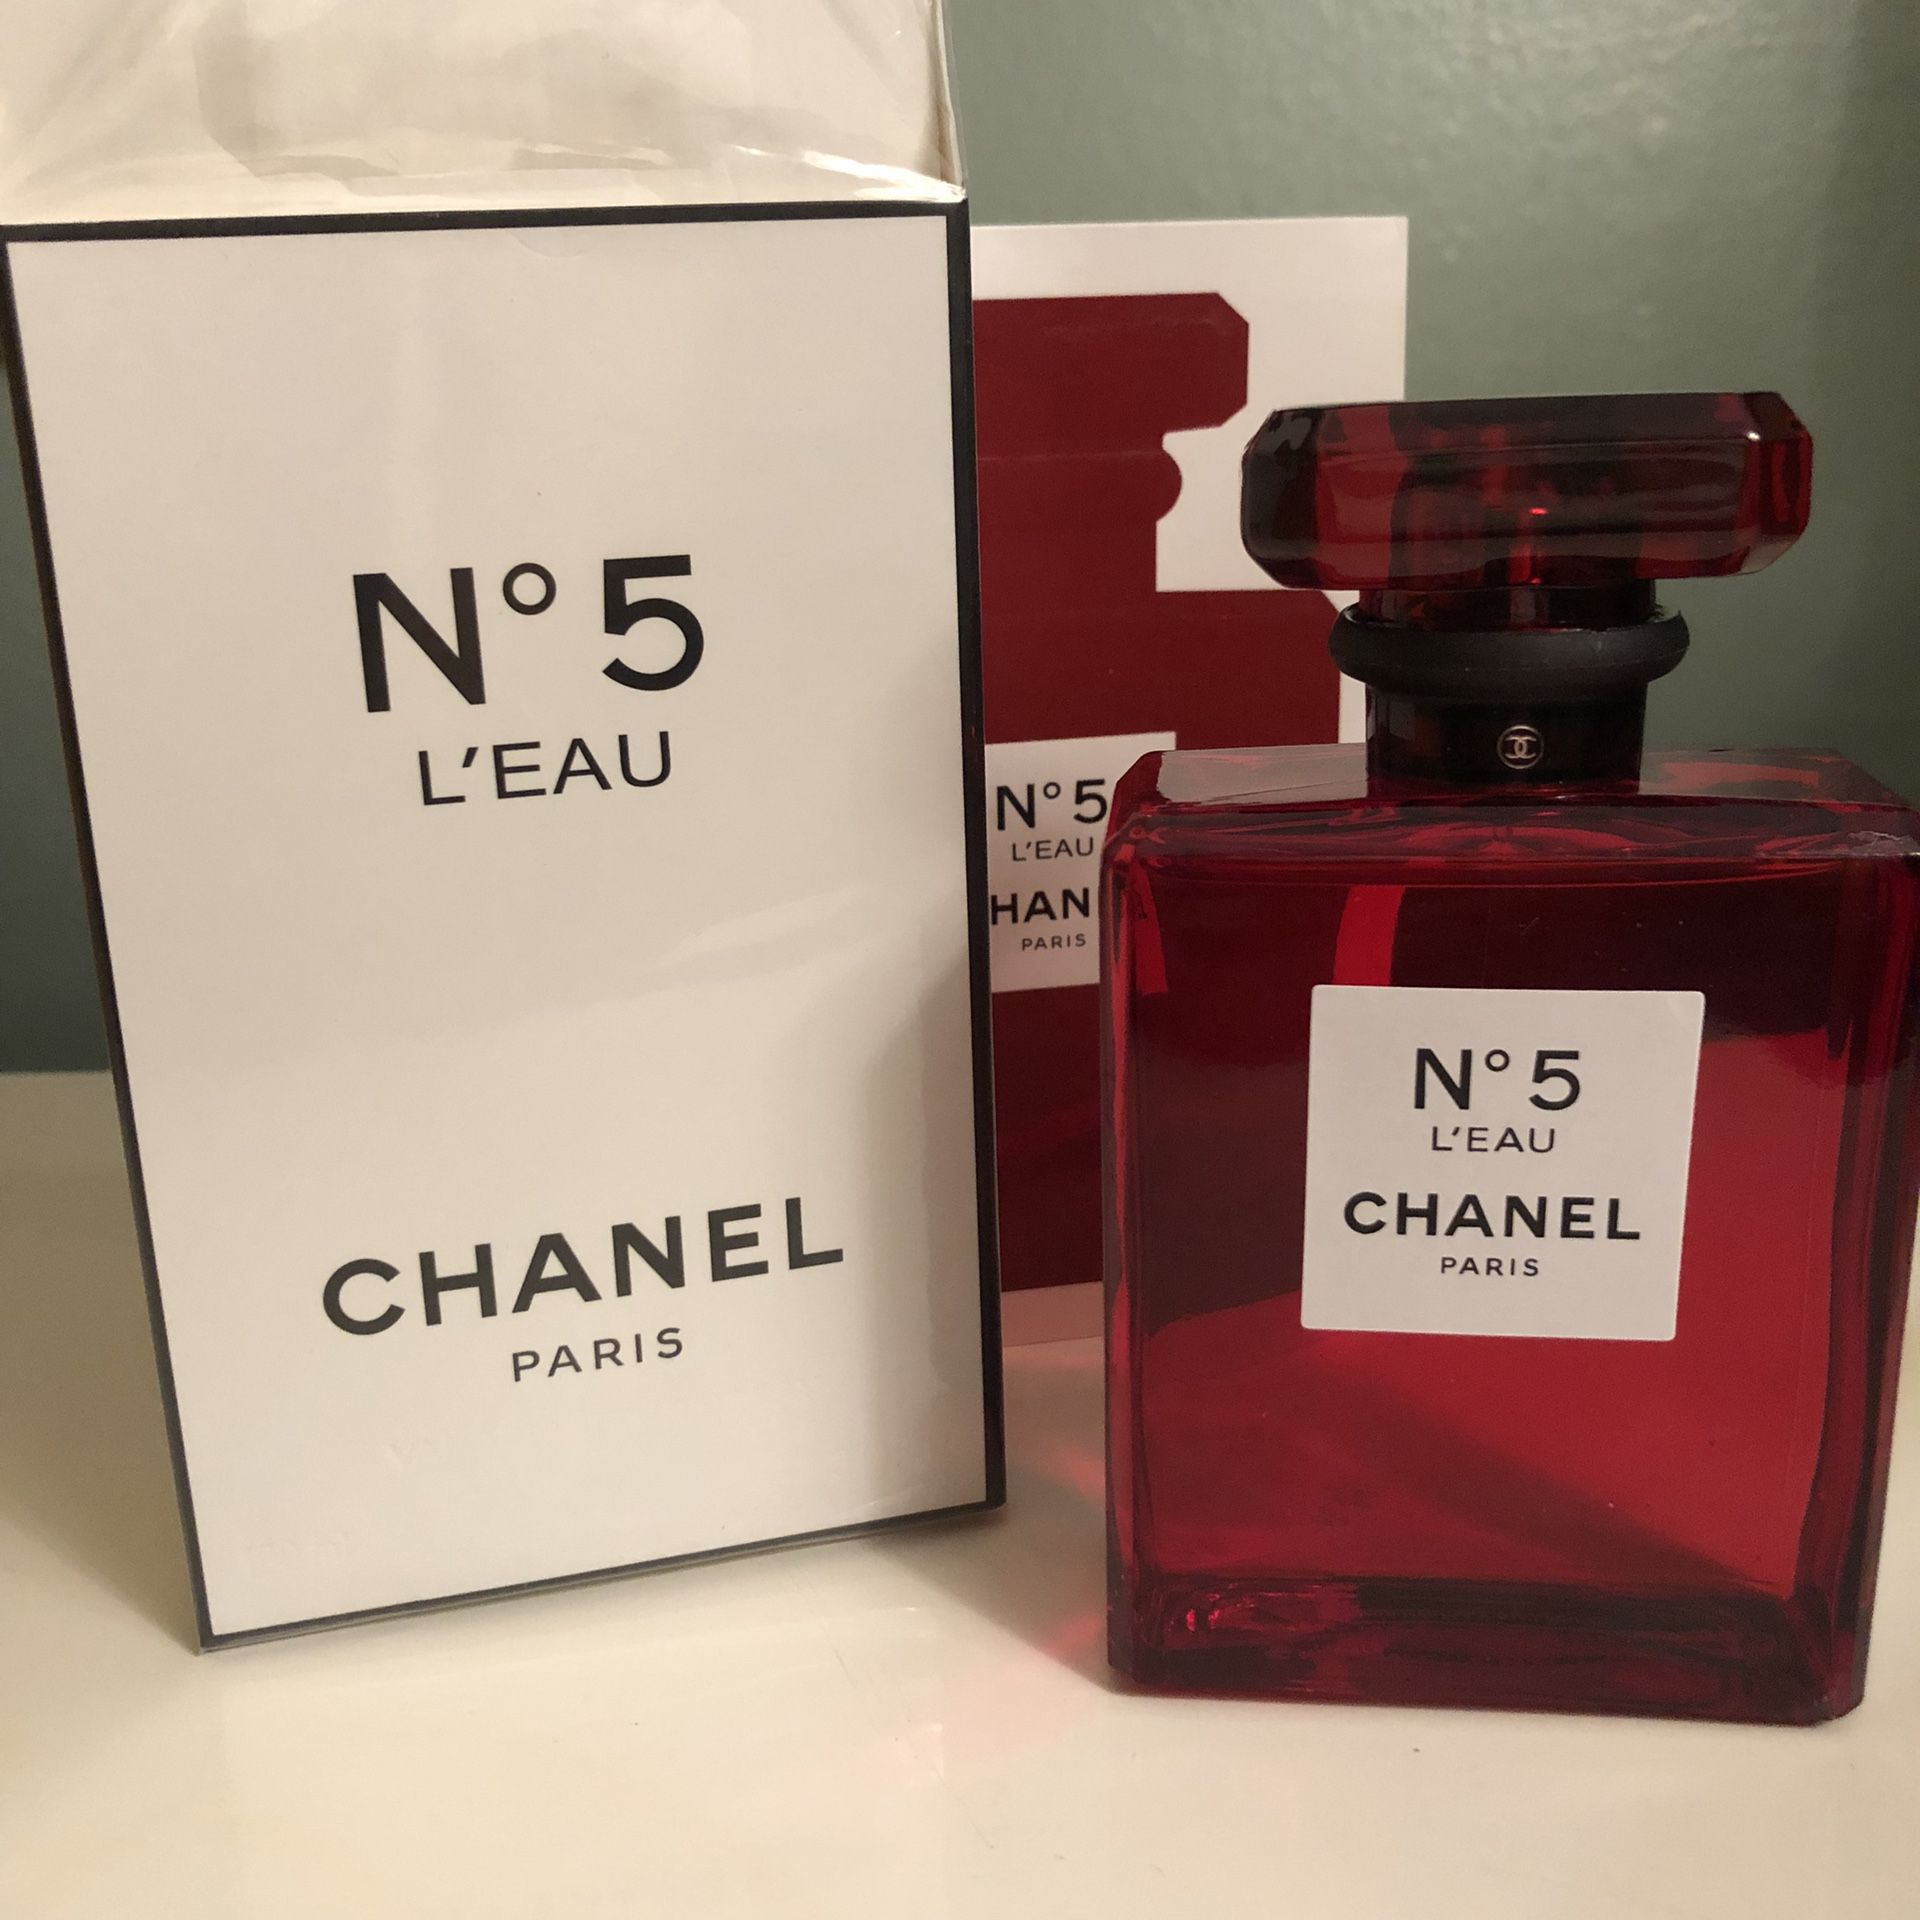 Fragrance for sale - New and Used - OfferUp